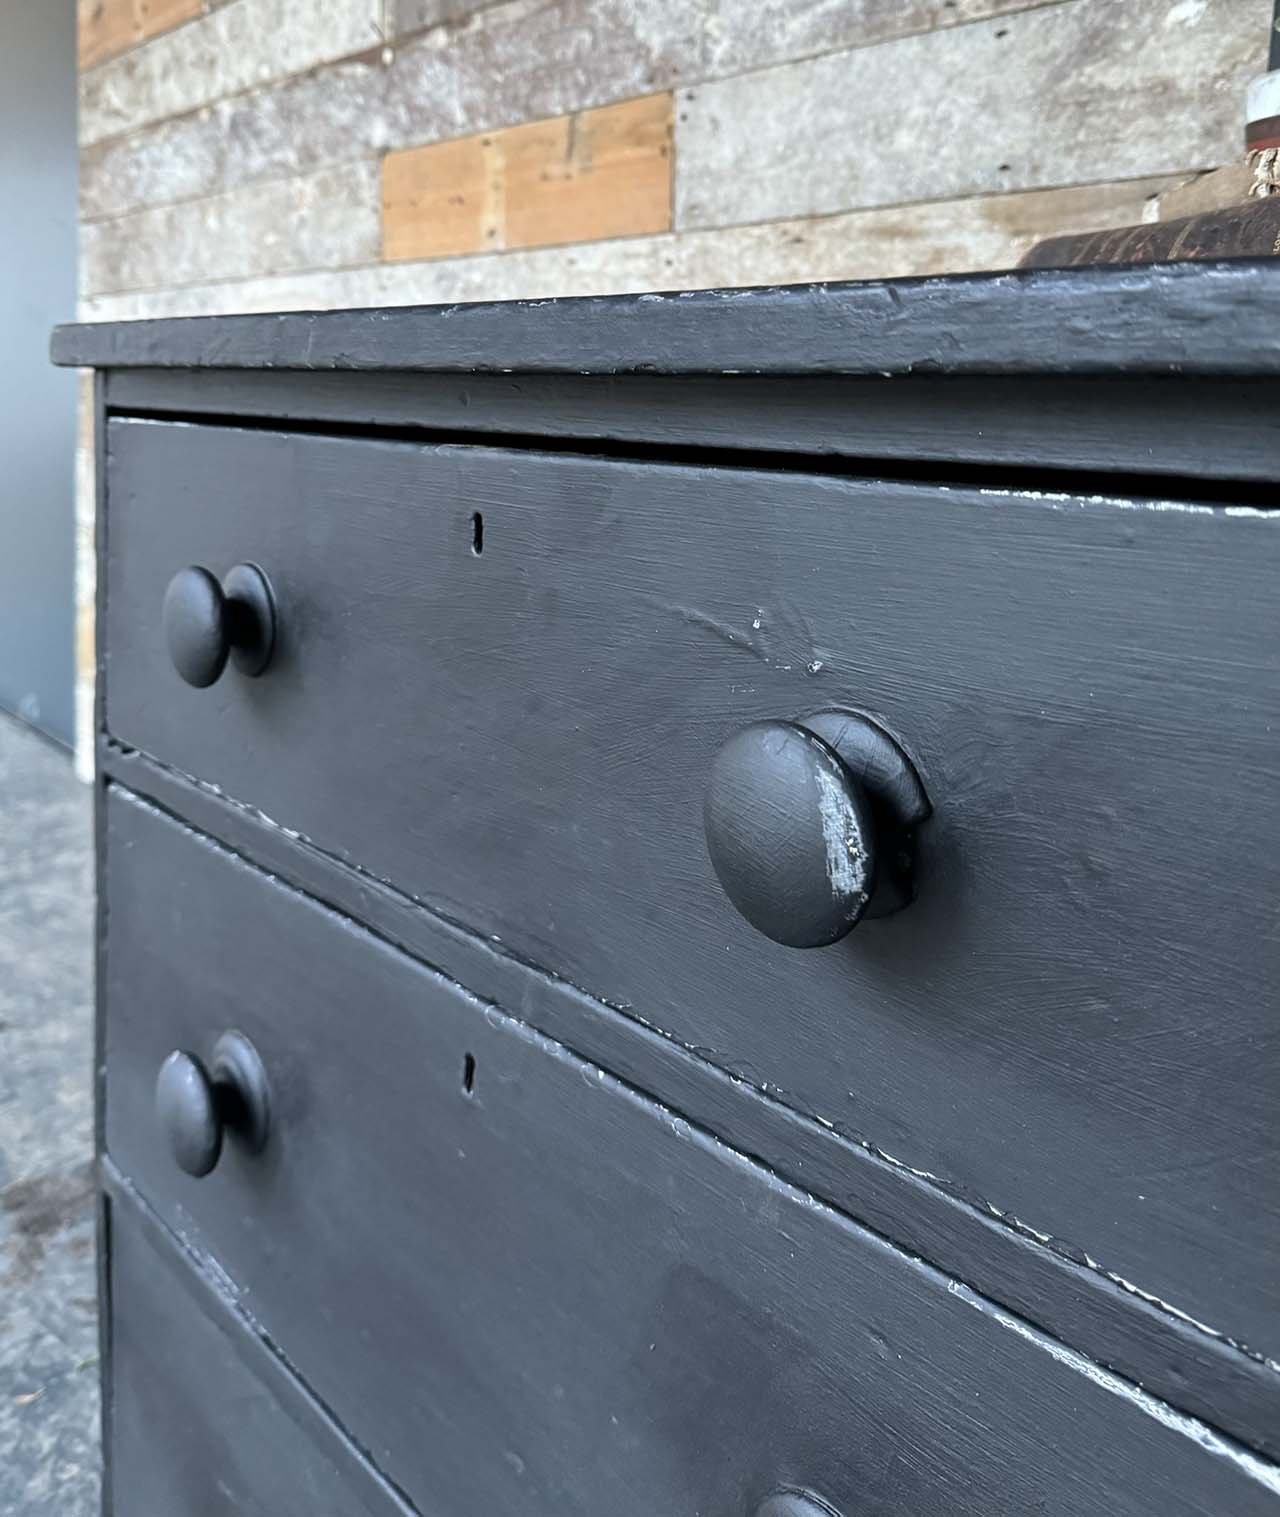 Deep Victorian Chest of Drawers